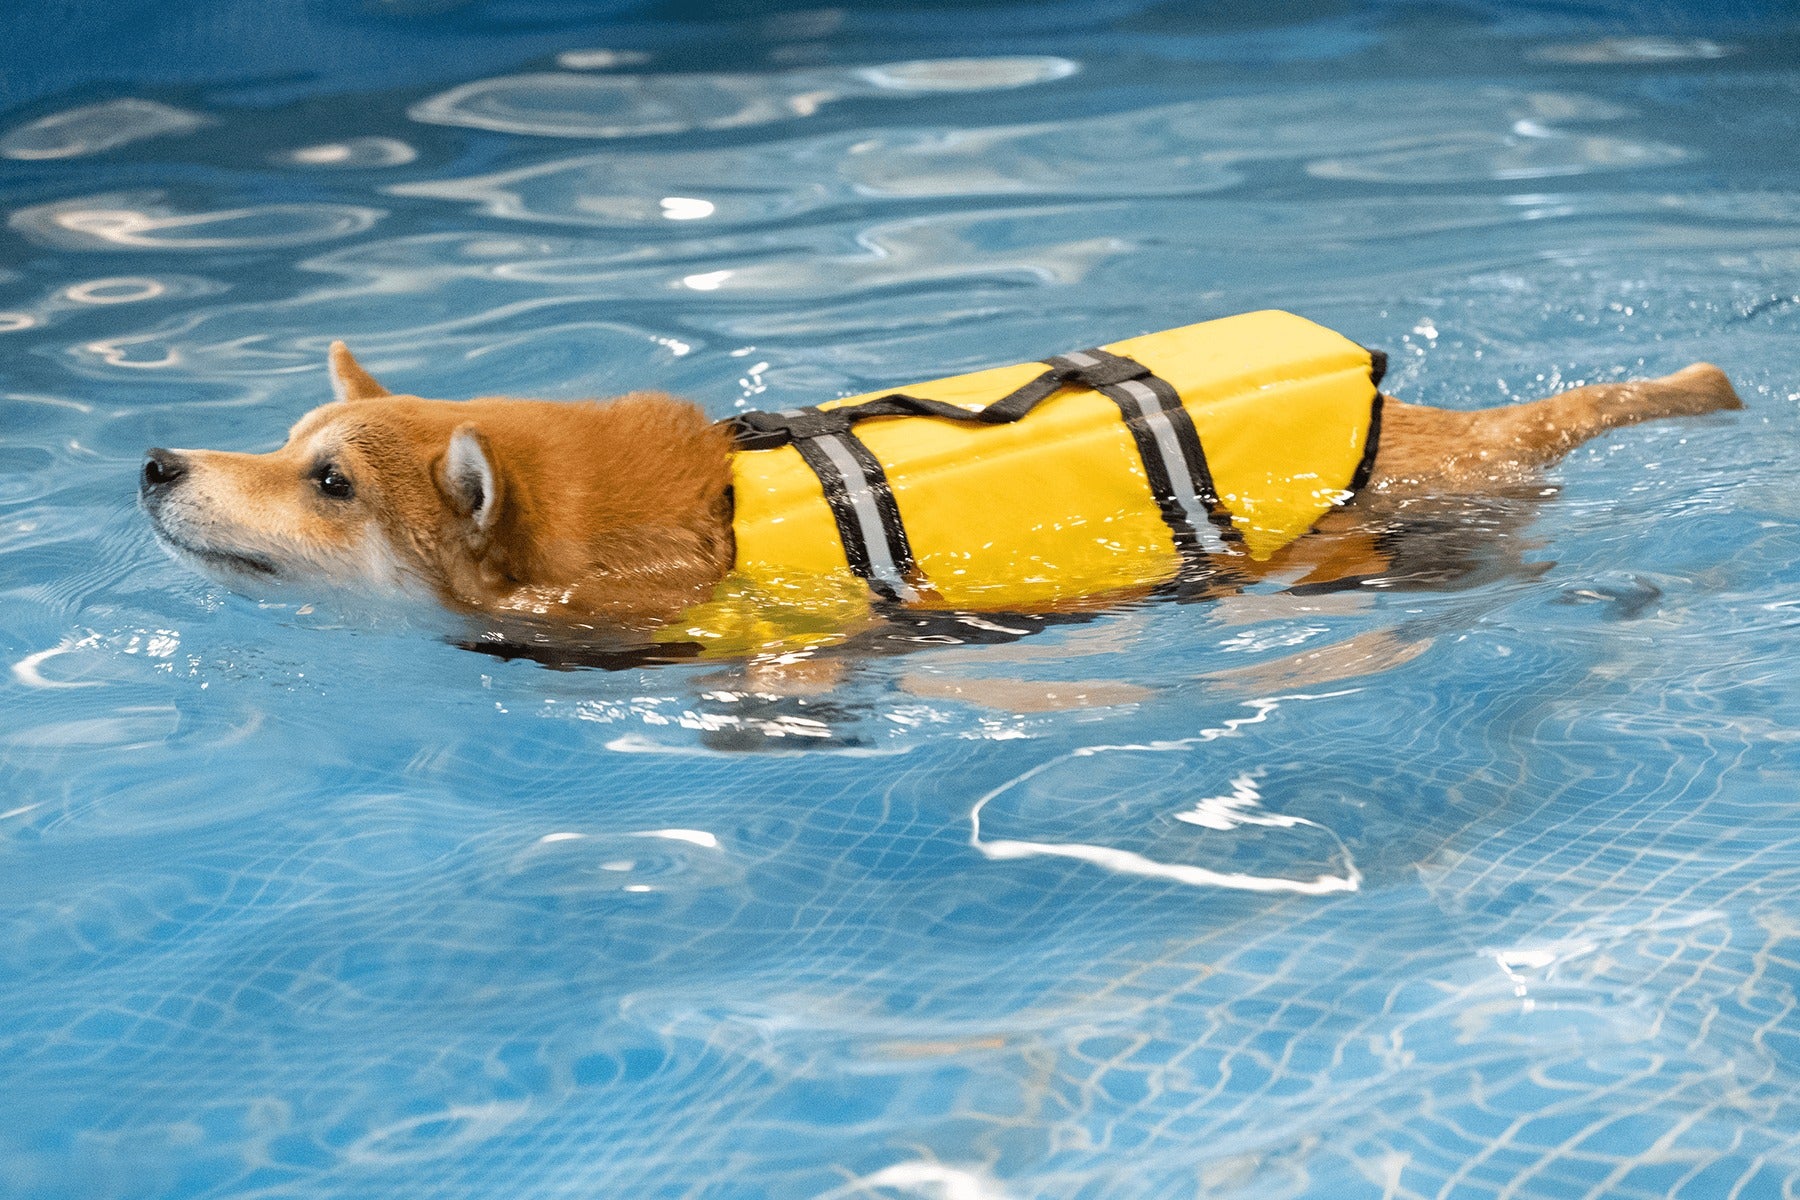 A life jacket helps a dog maintain balance and buoyancy, and also makes it easier for the owner to grab or pull it up.